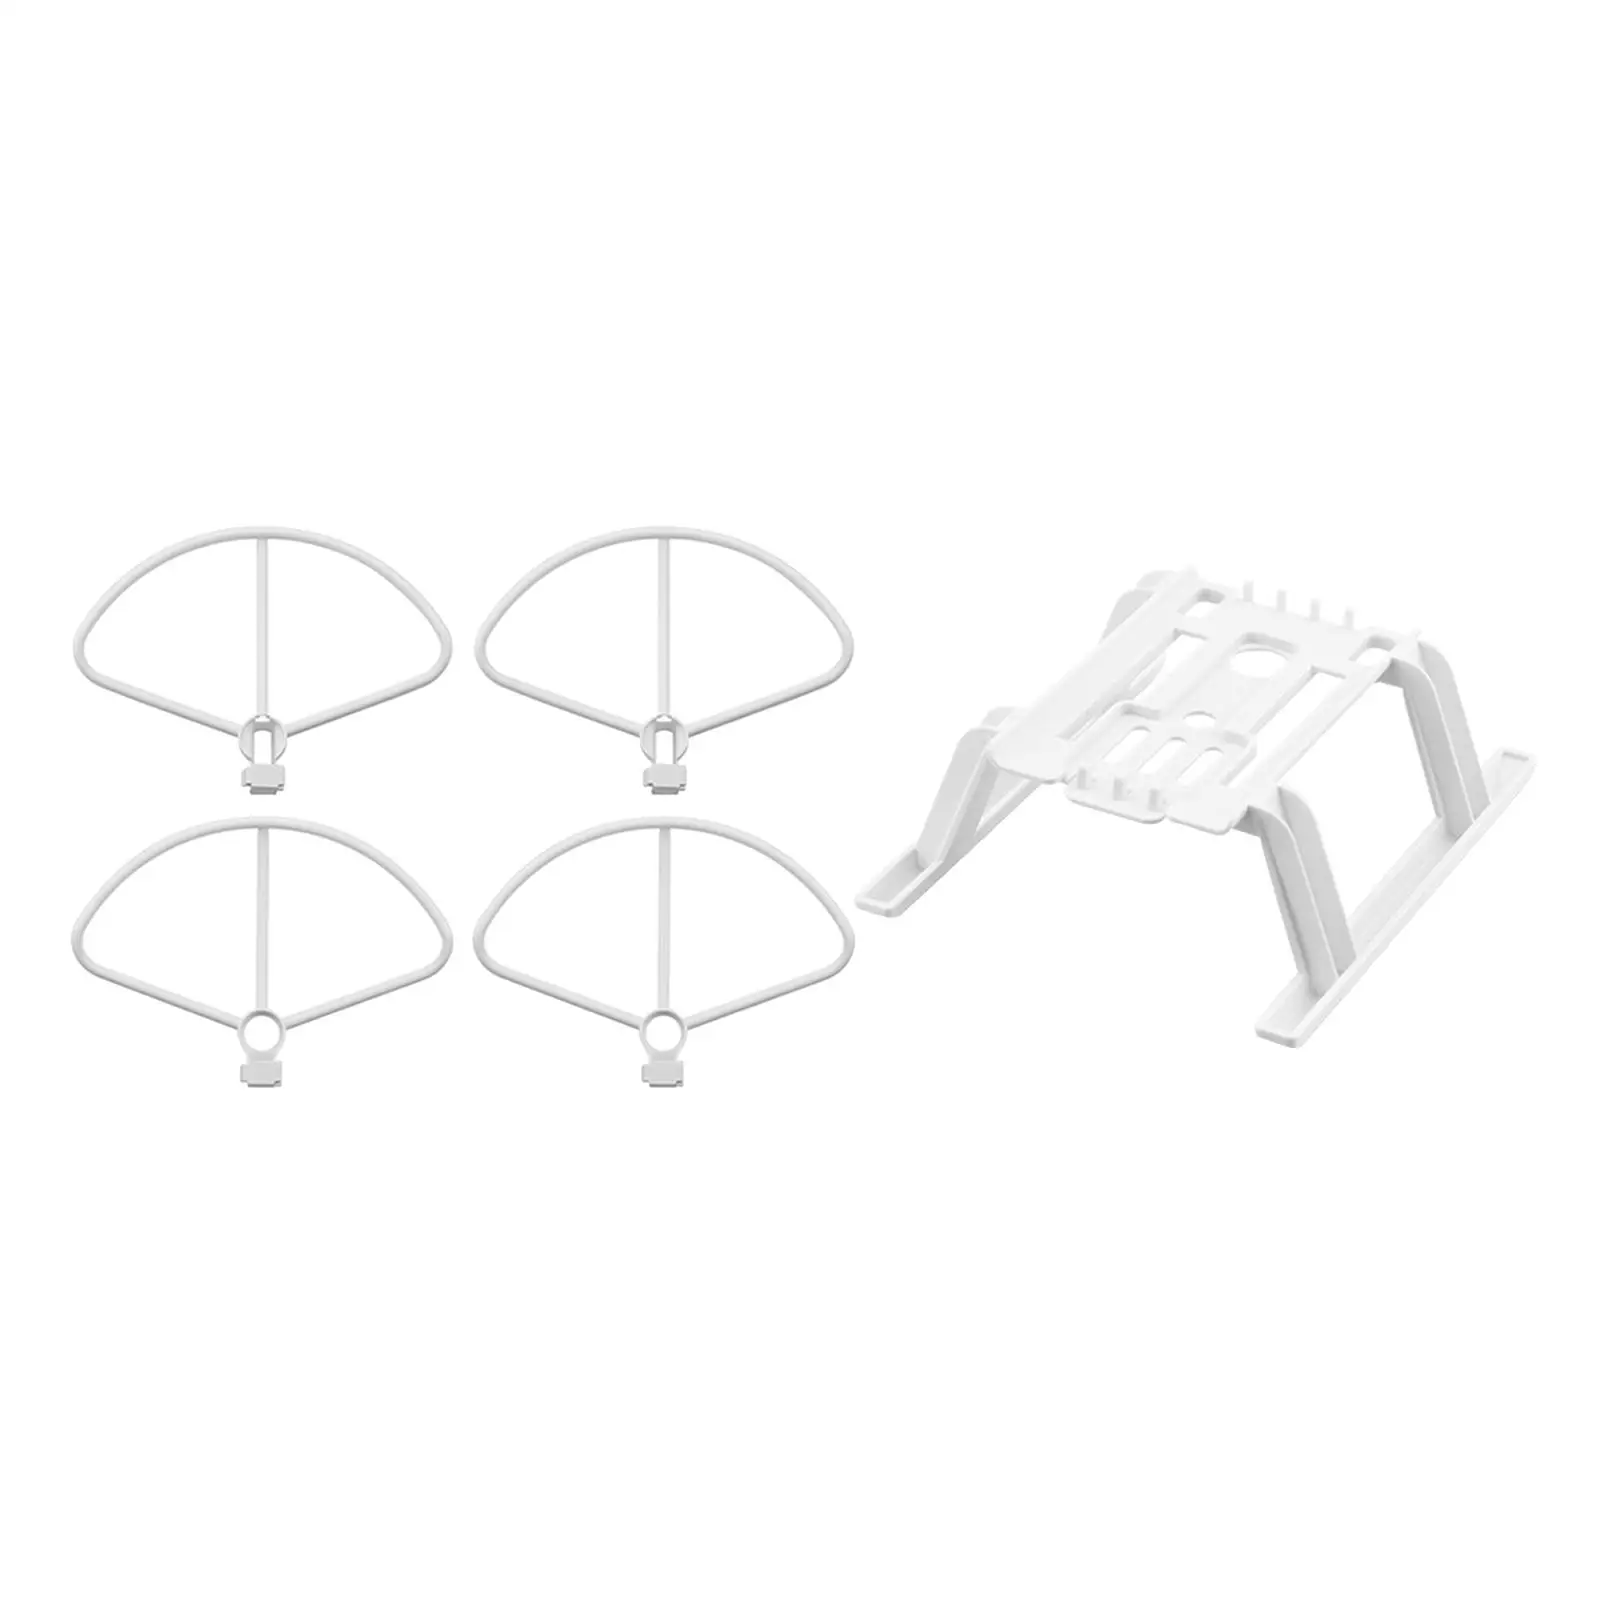 Propeller Guards Protectors Landing Gear for FIMI X8 SE RC Drone